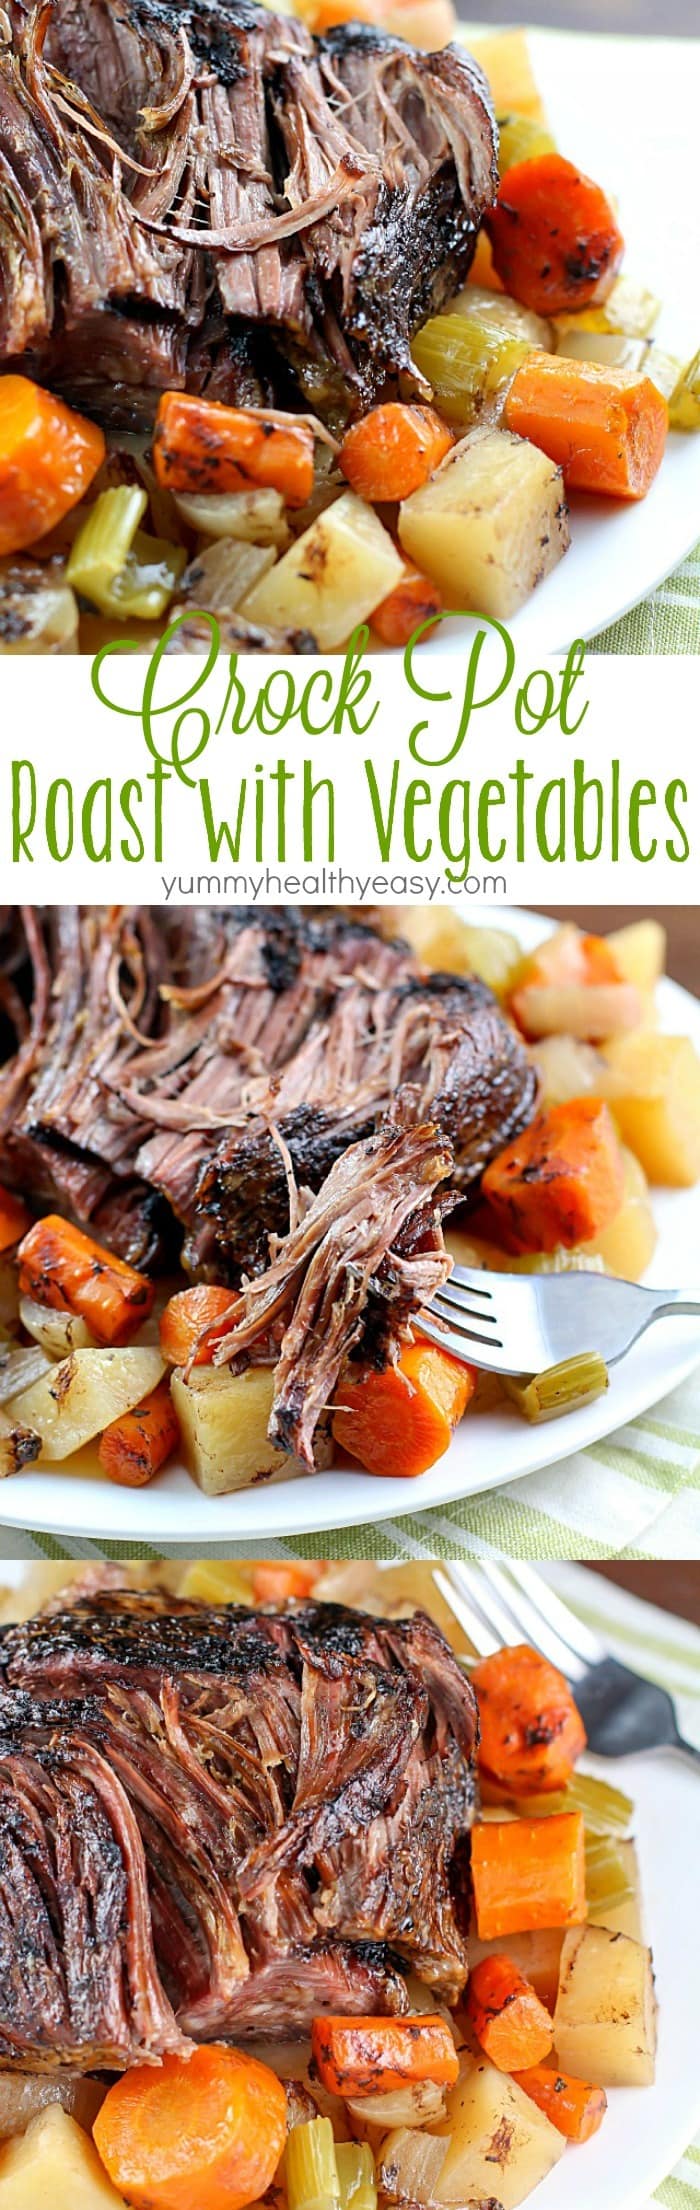 This Crock Pot Roast with Vegetables is a family favorite  meal! It's an entire dinner in one crock pot - with veggies, starch and meat all cooked together. The meat is SO tender and delicious! This is a must-make! via @jennikolaus